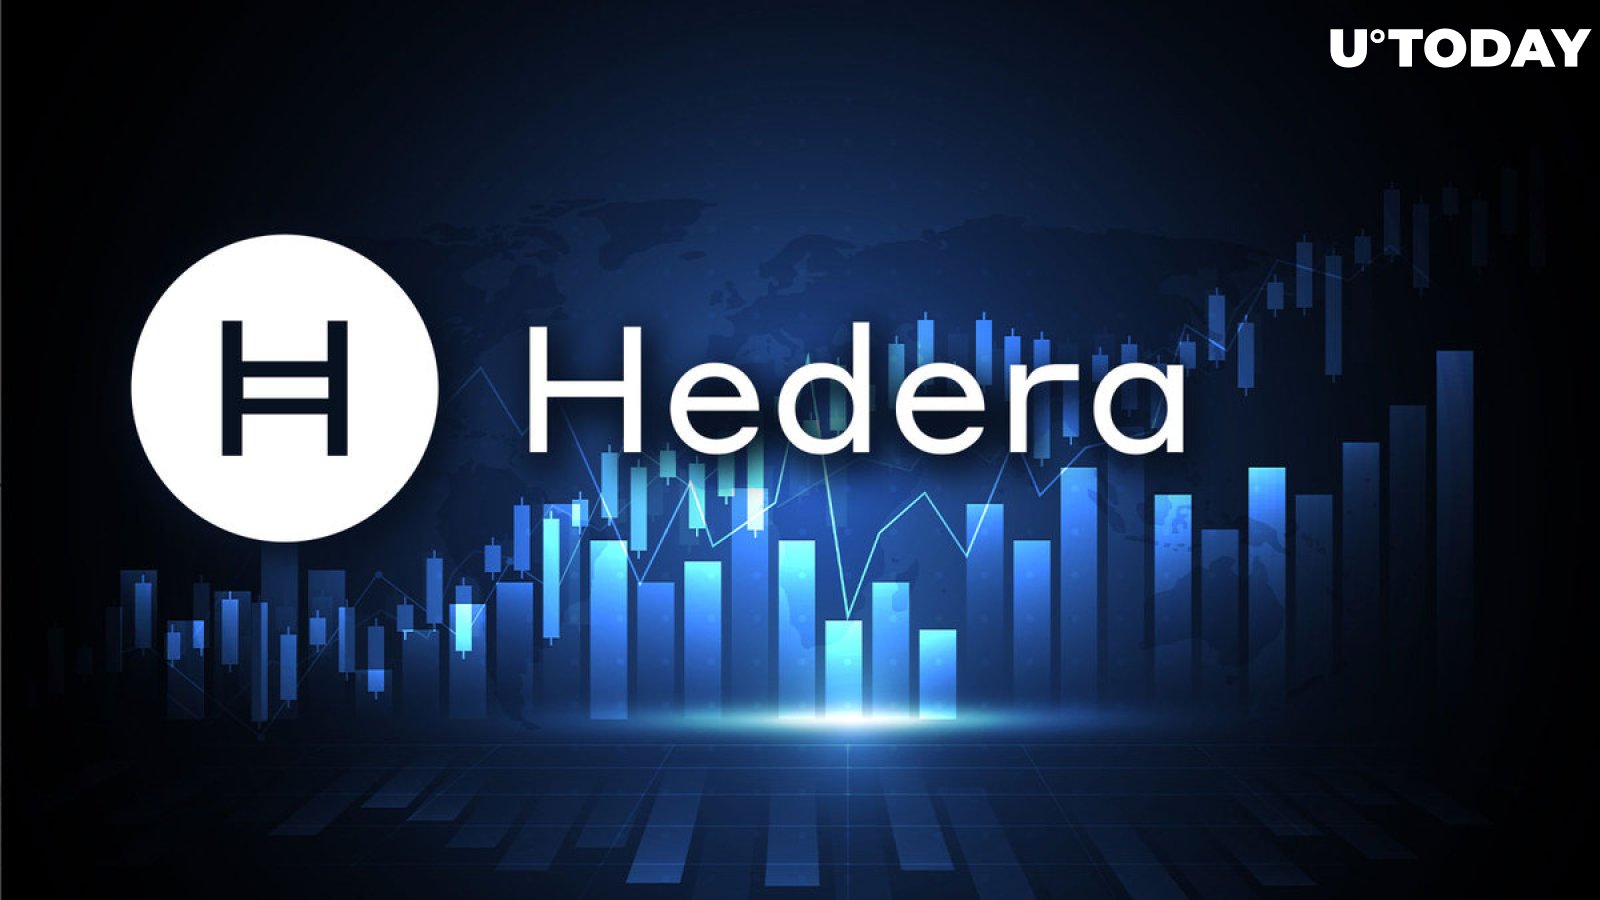 Hedera (HBAR) 17% Spike Amid Falling Market, Here's What's Behind It